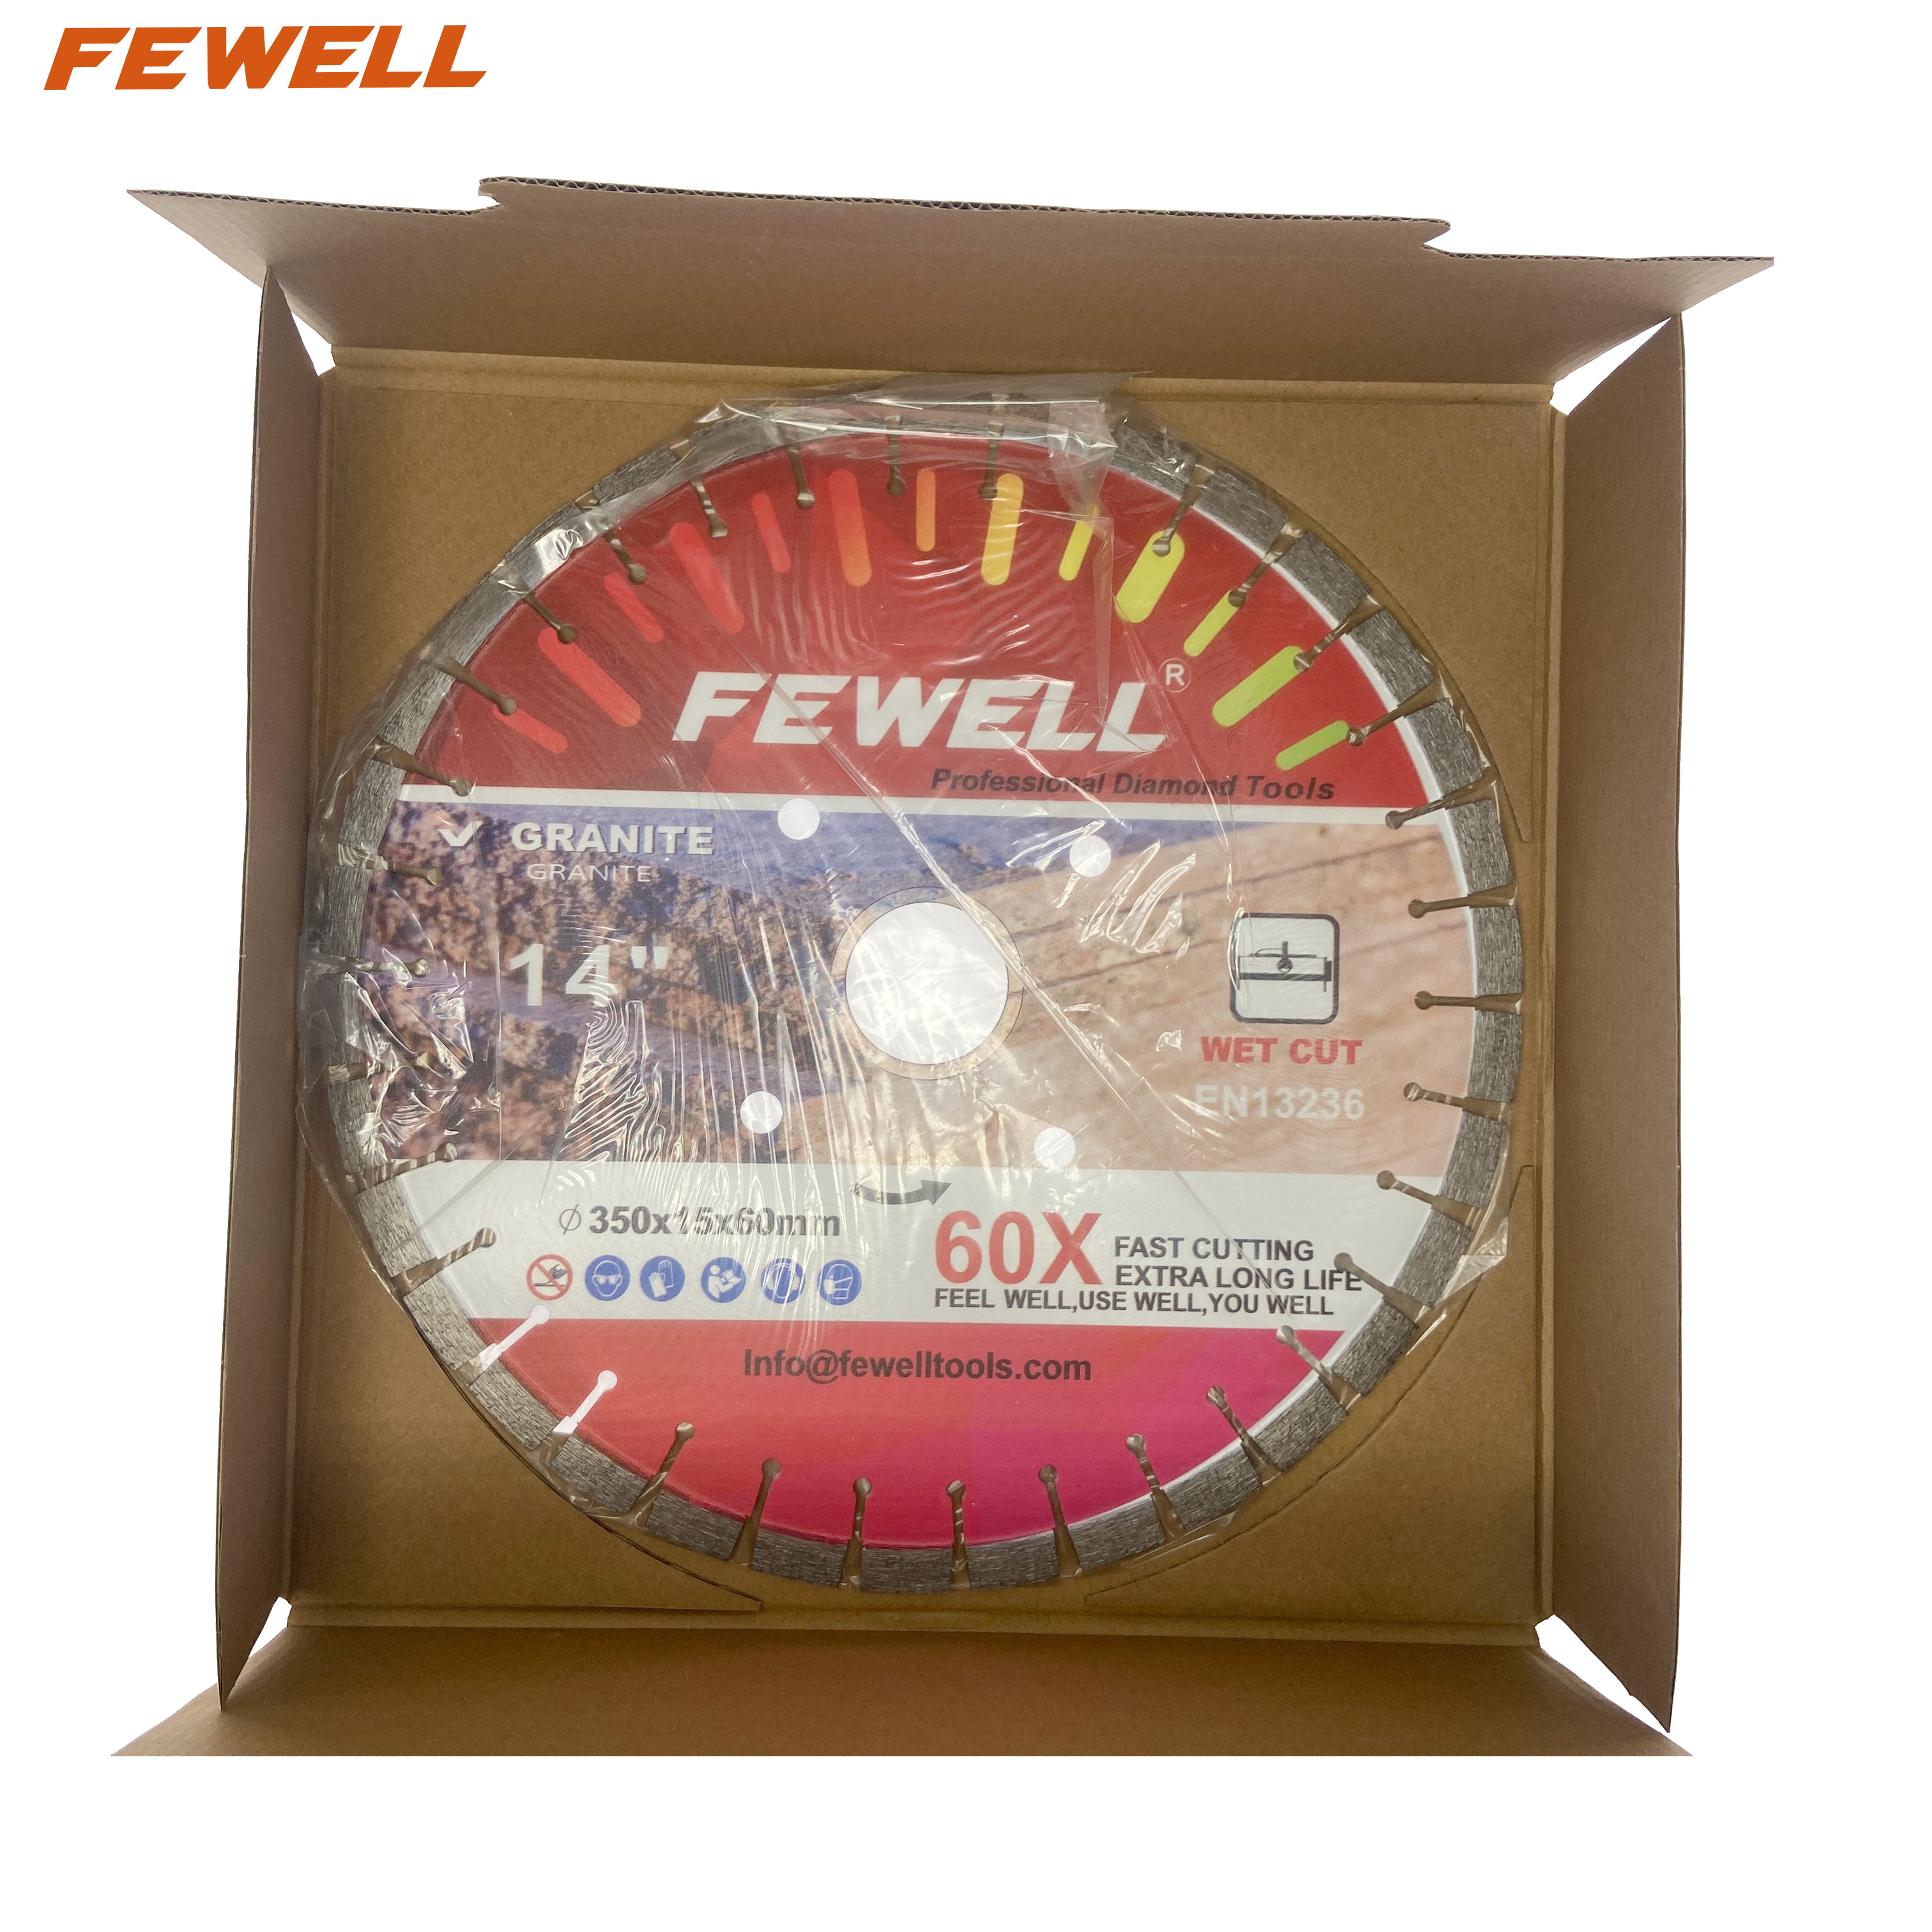 Premium quality 14/16inch 350/400*15*60 with 50mm ring Silver Brazed segmented diamond saw blade for cutting granite